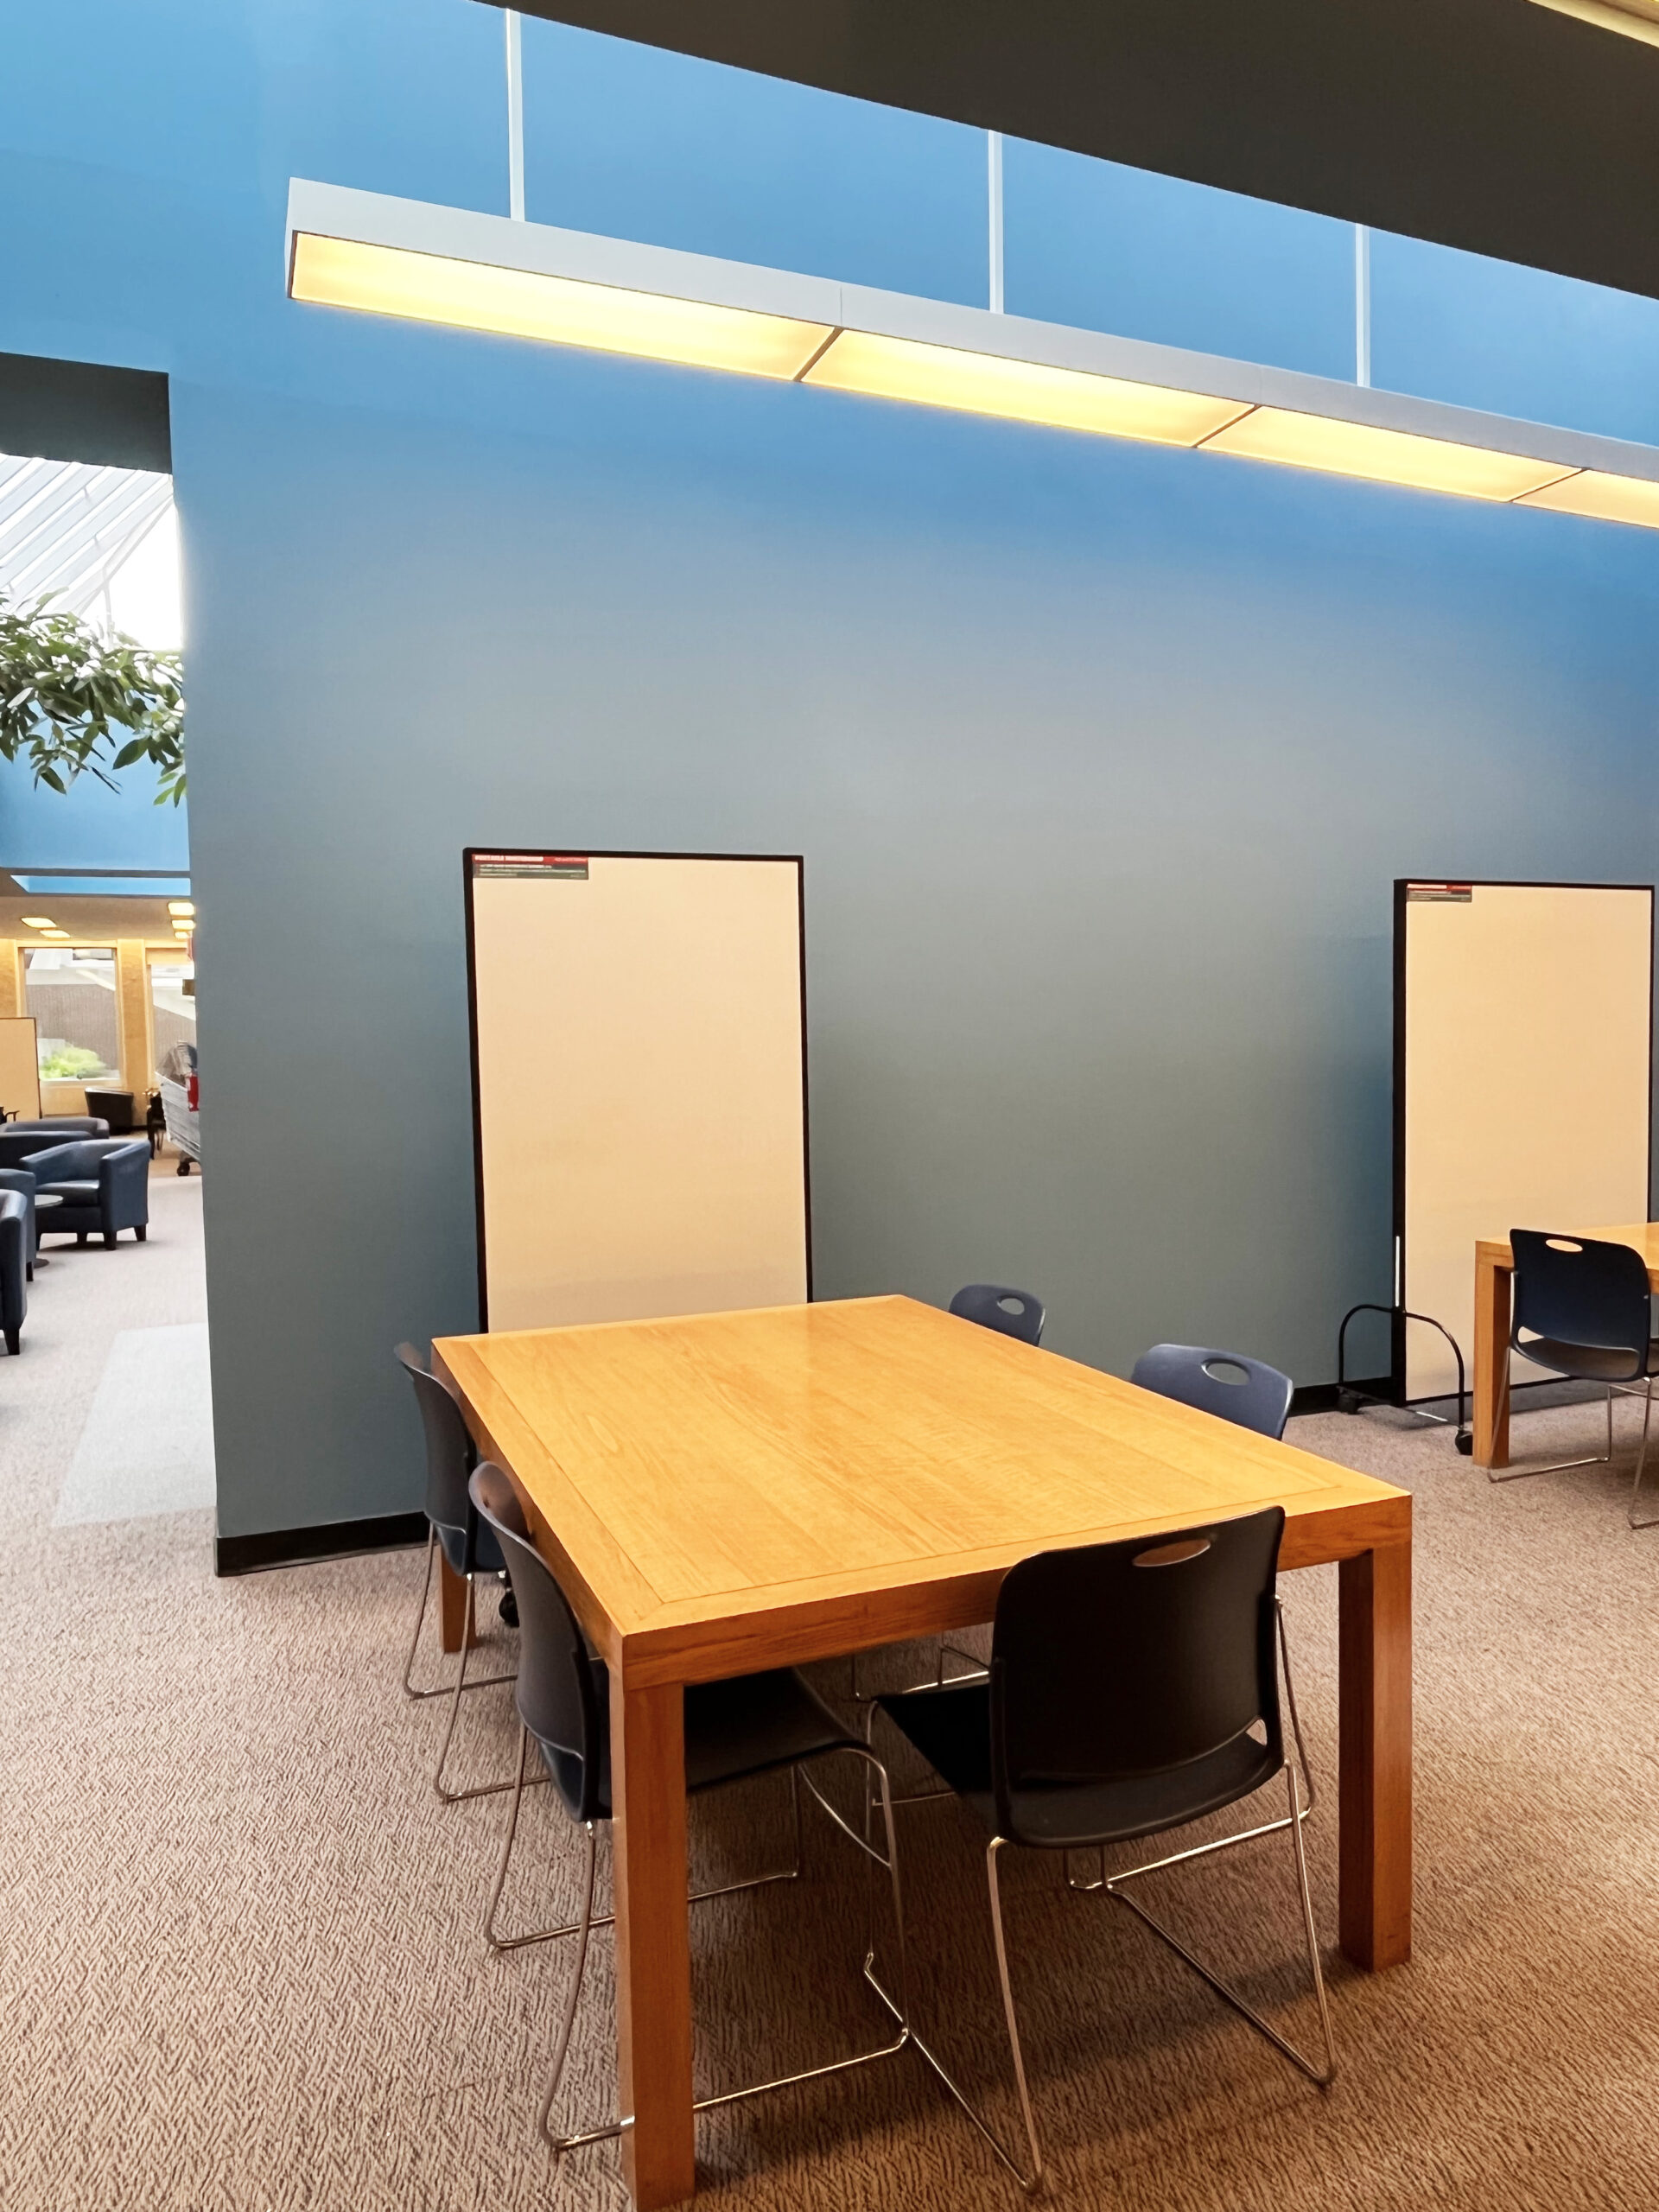 photos of the many study spaces available at the Notre Dame Campus Library